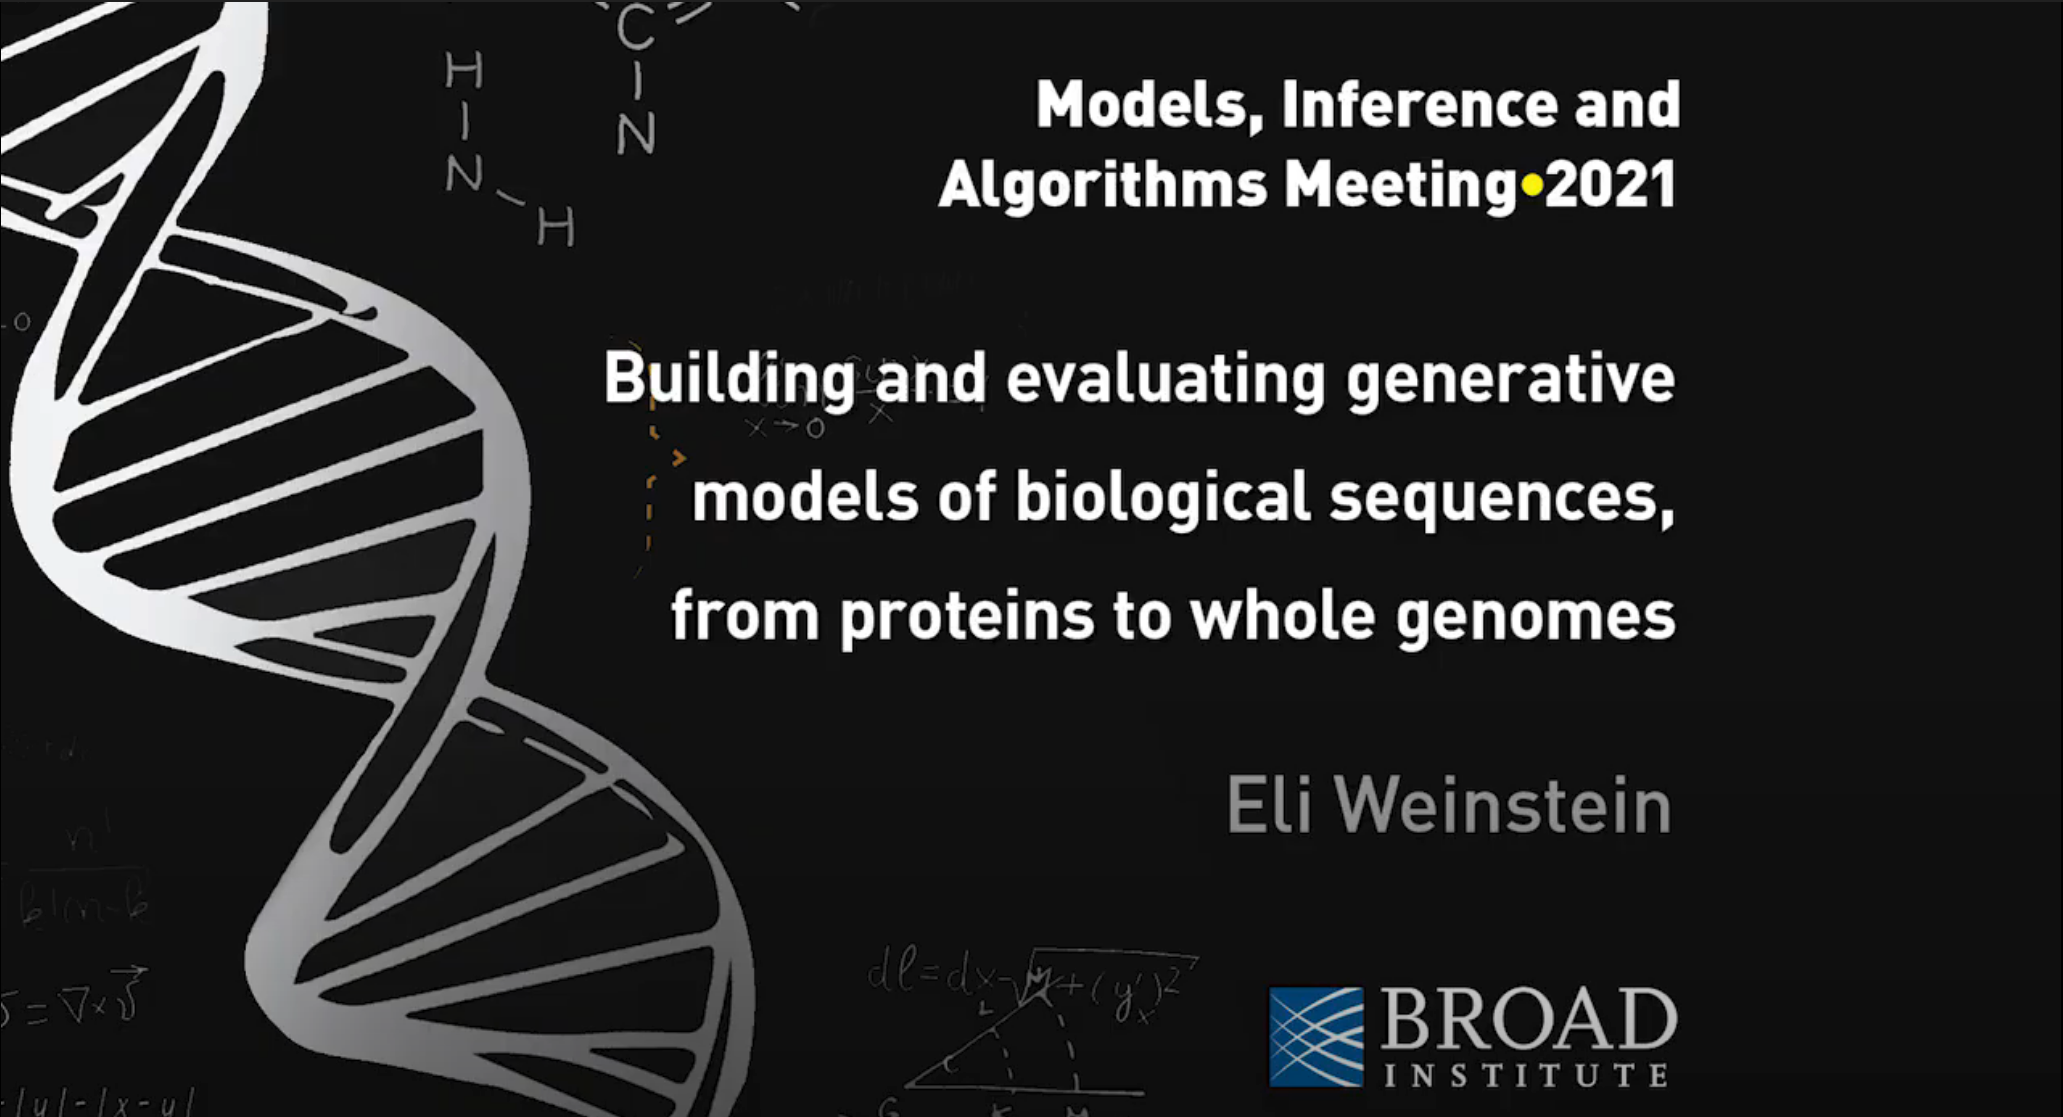 MIA: Eli Weinstein—Building and evaluating generative models of biological sequences, from proteins to whole genomes